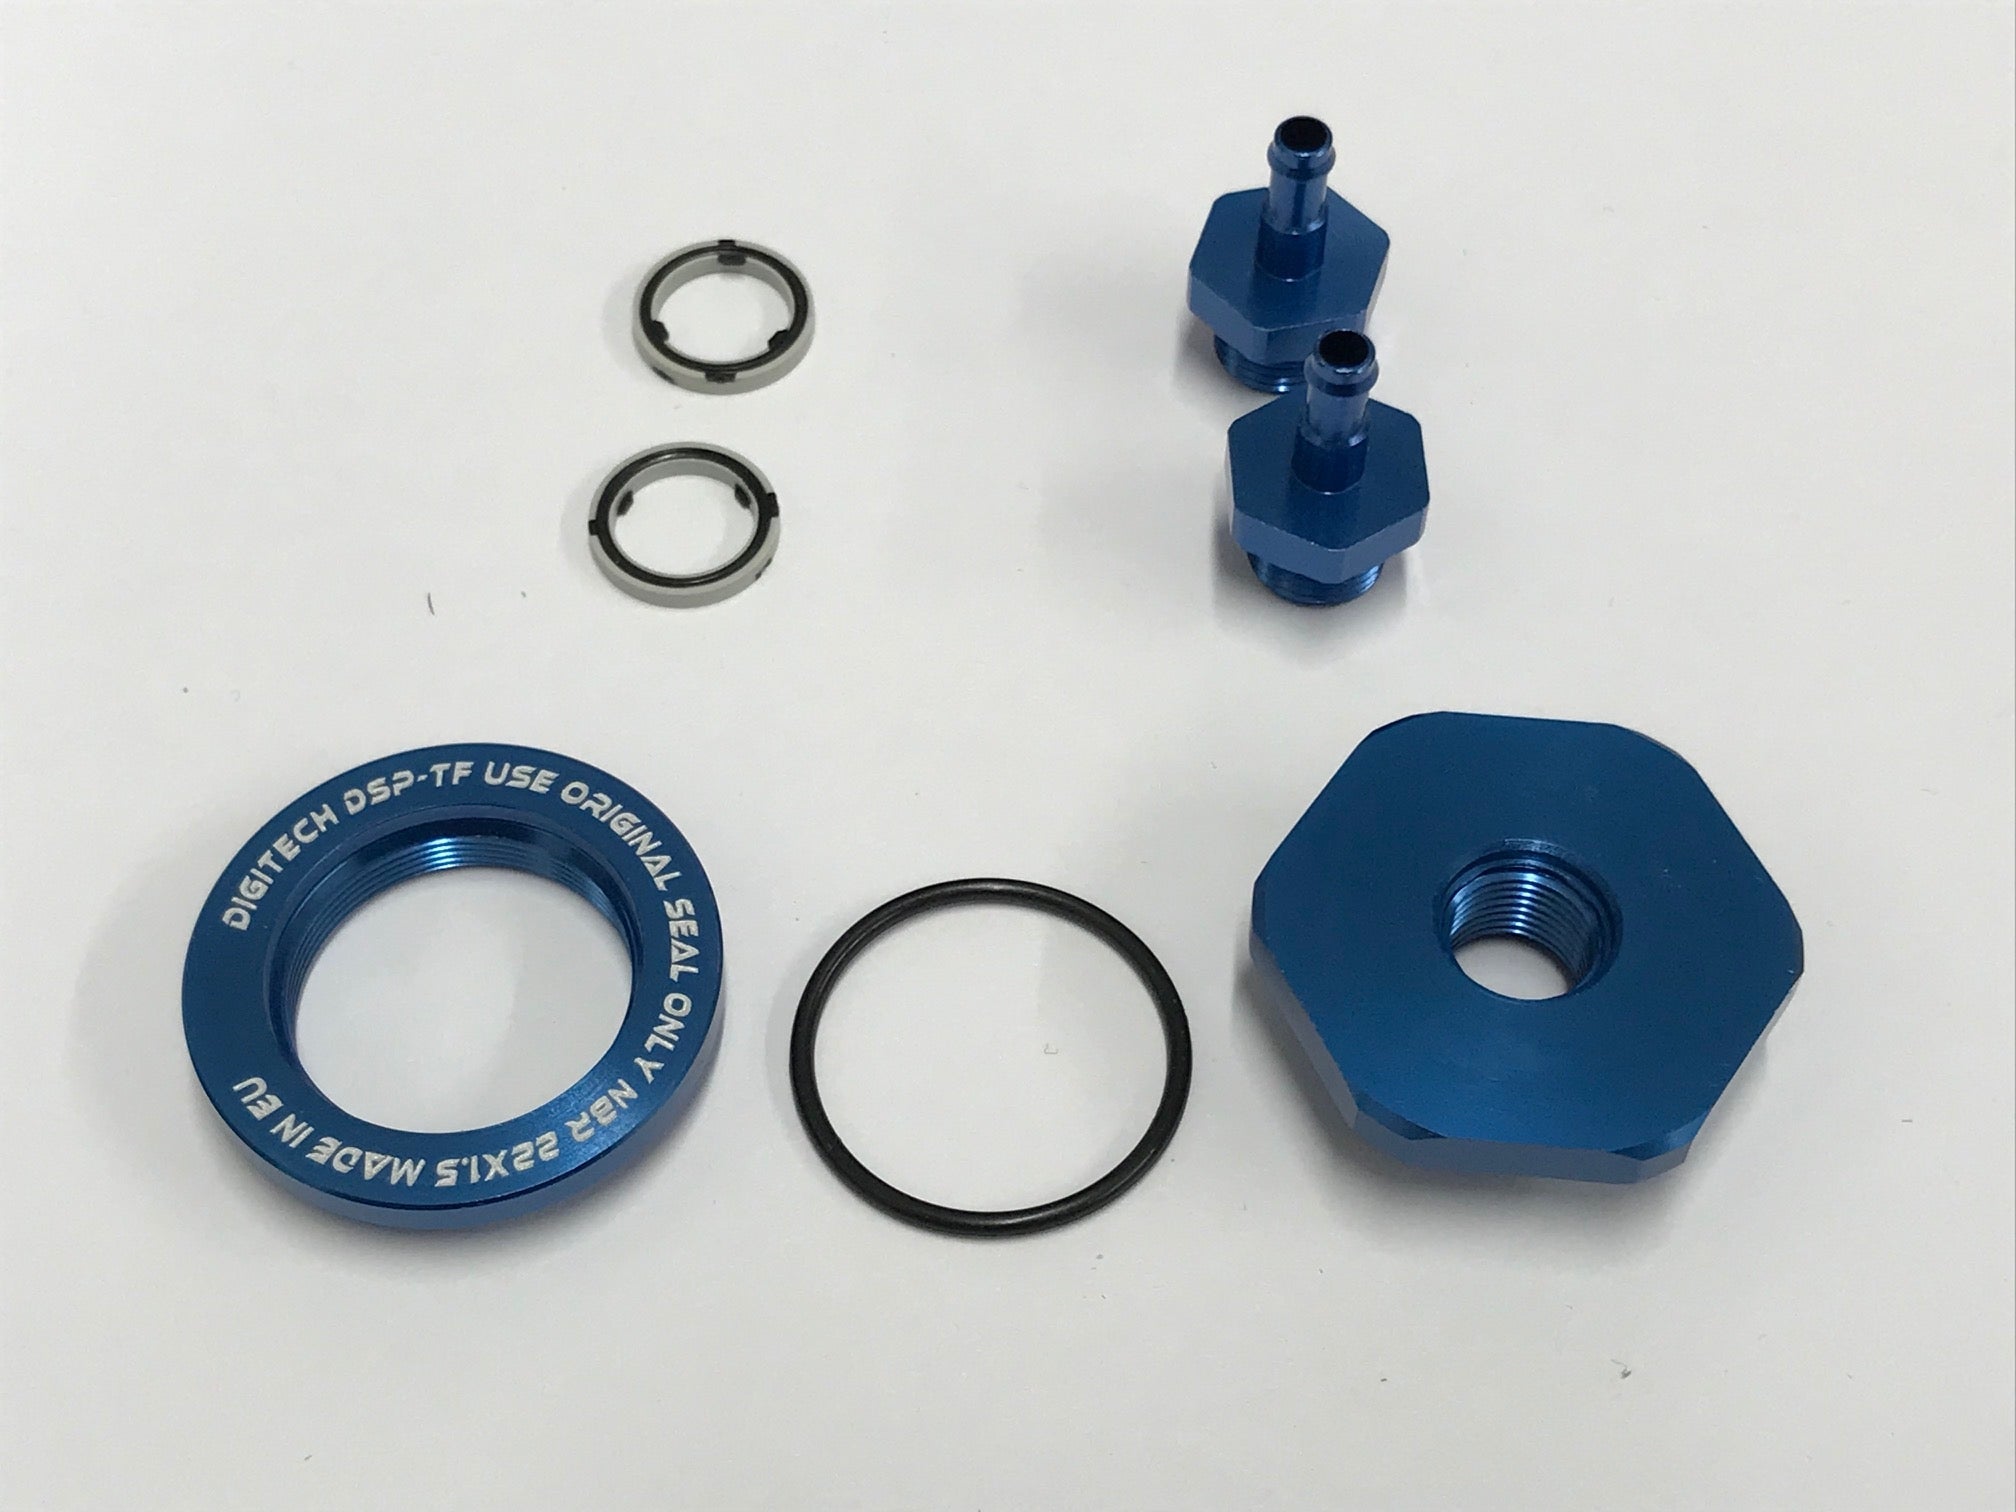 Digitech High Flow Fuel Tank Fitting Barbed for 6mm Festo Tube or 1/8 & 5/32 Tygon Tube